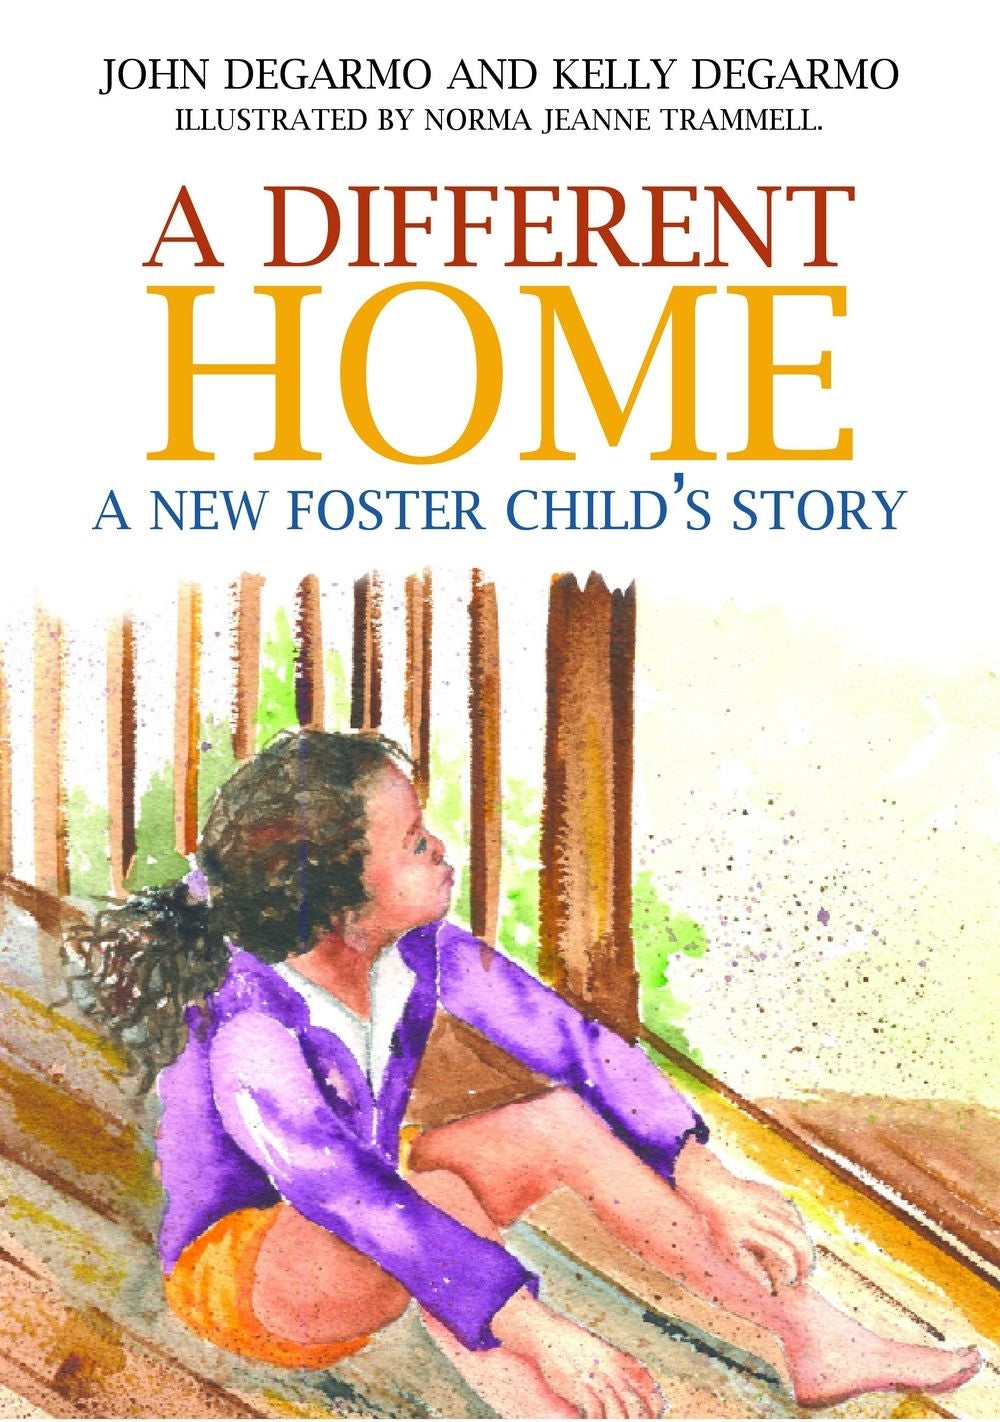 A Different Home by John DeGarmo, Dr Kelly Degarmo, Norma Jeanne Trammell